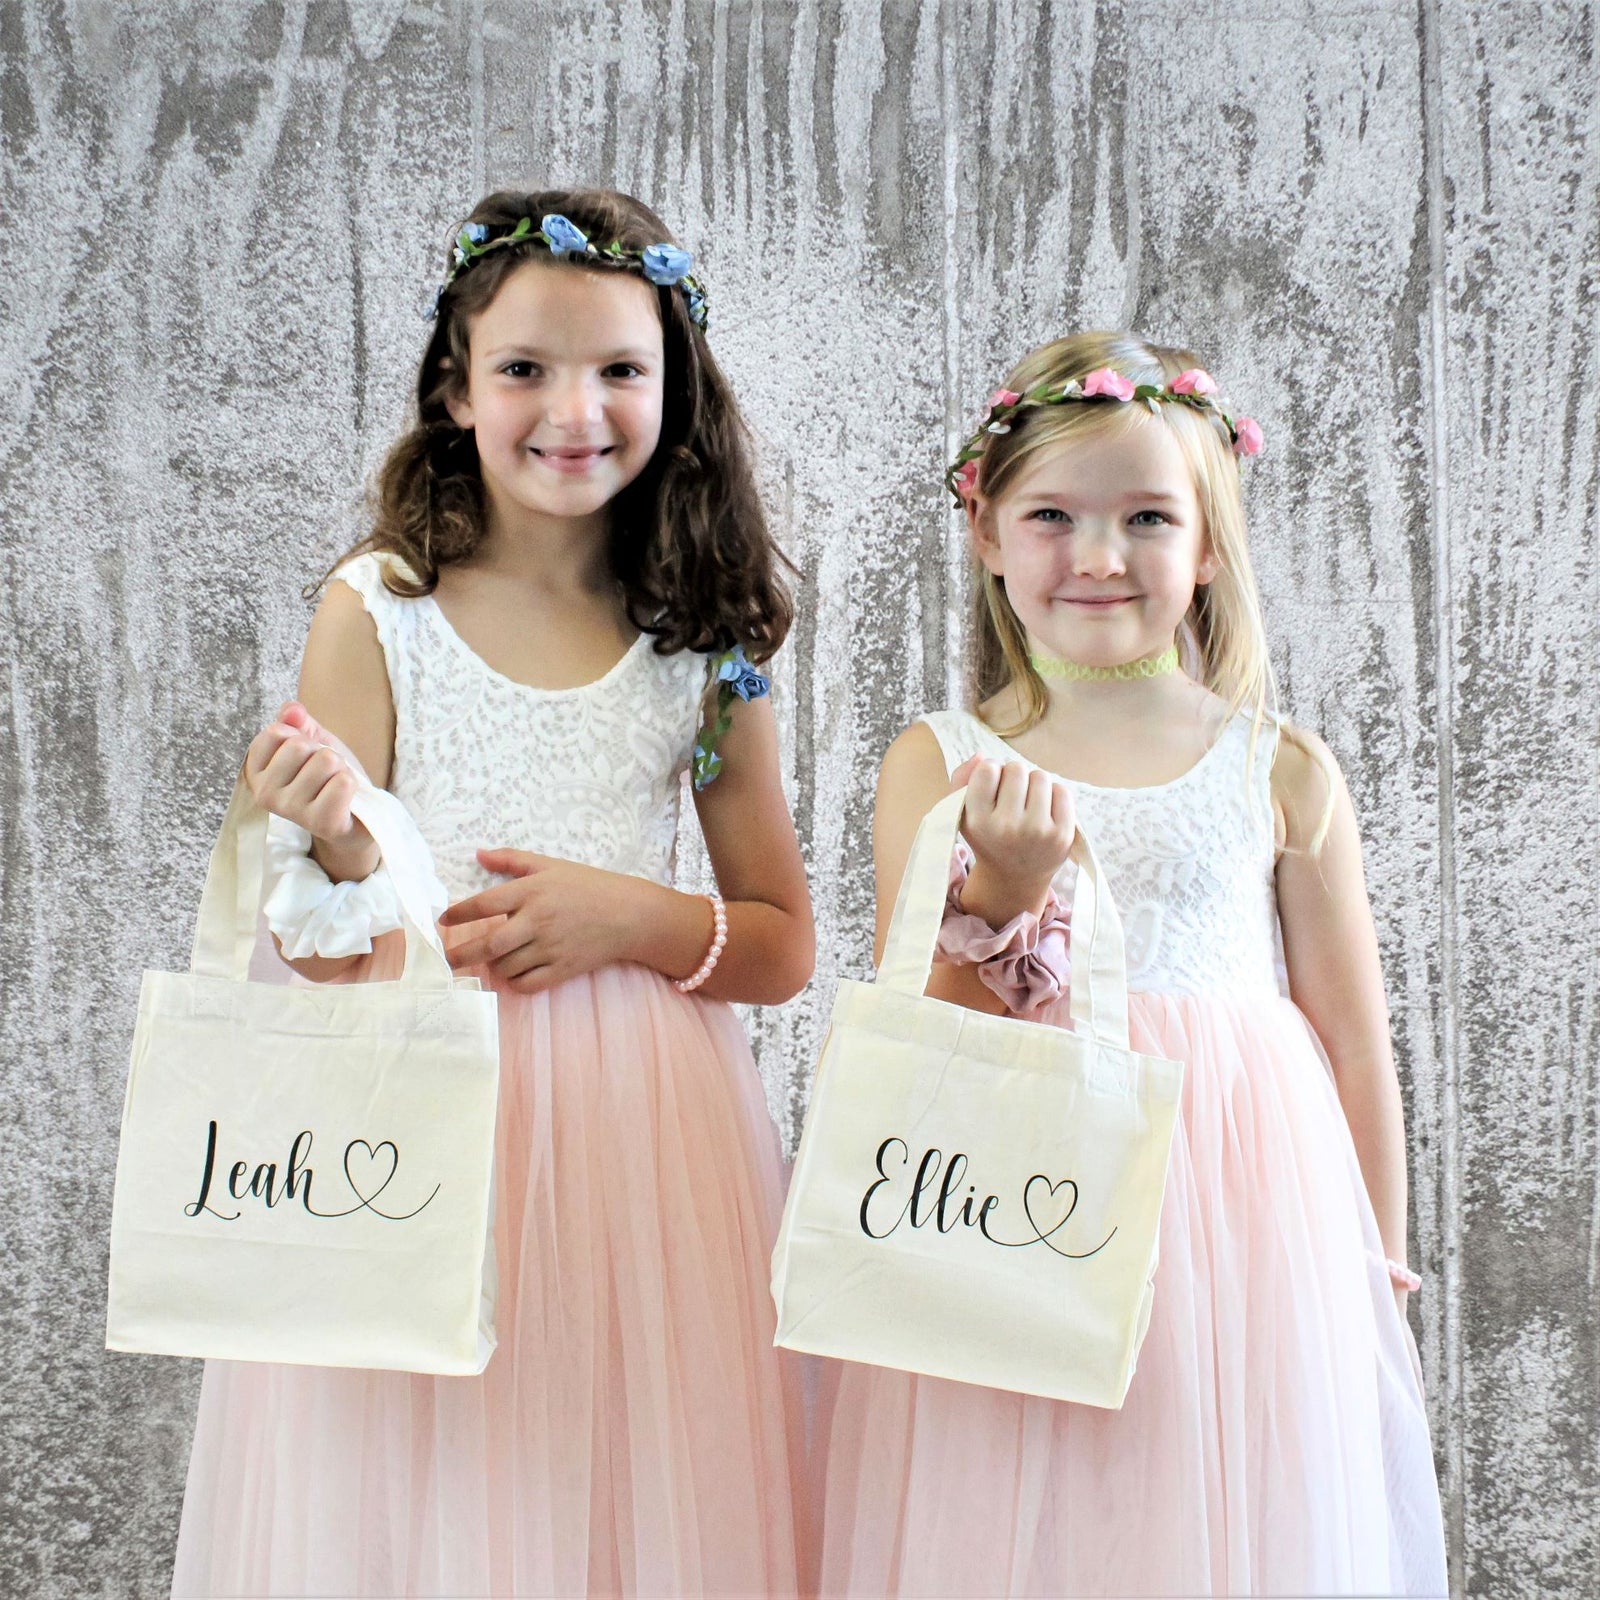 The 20 Best Flower Girl Gifts of 2024